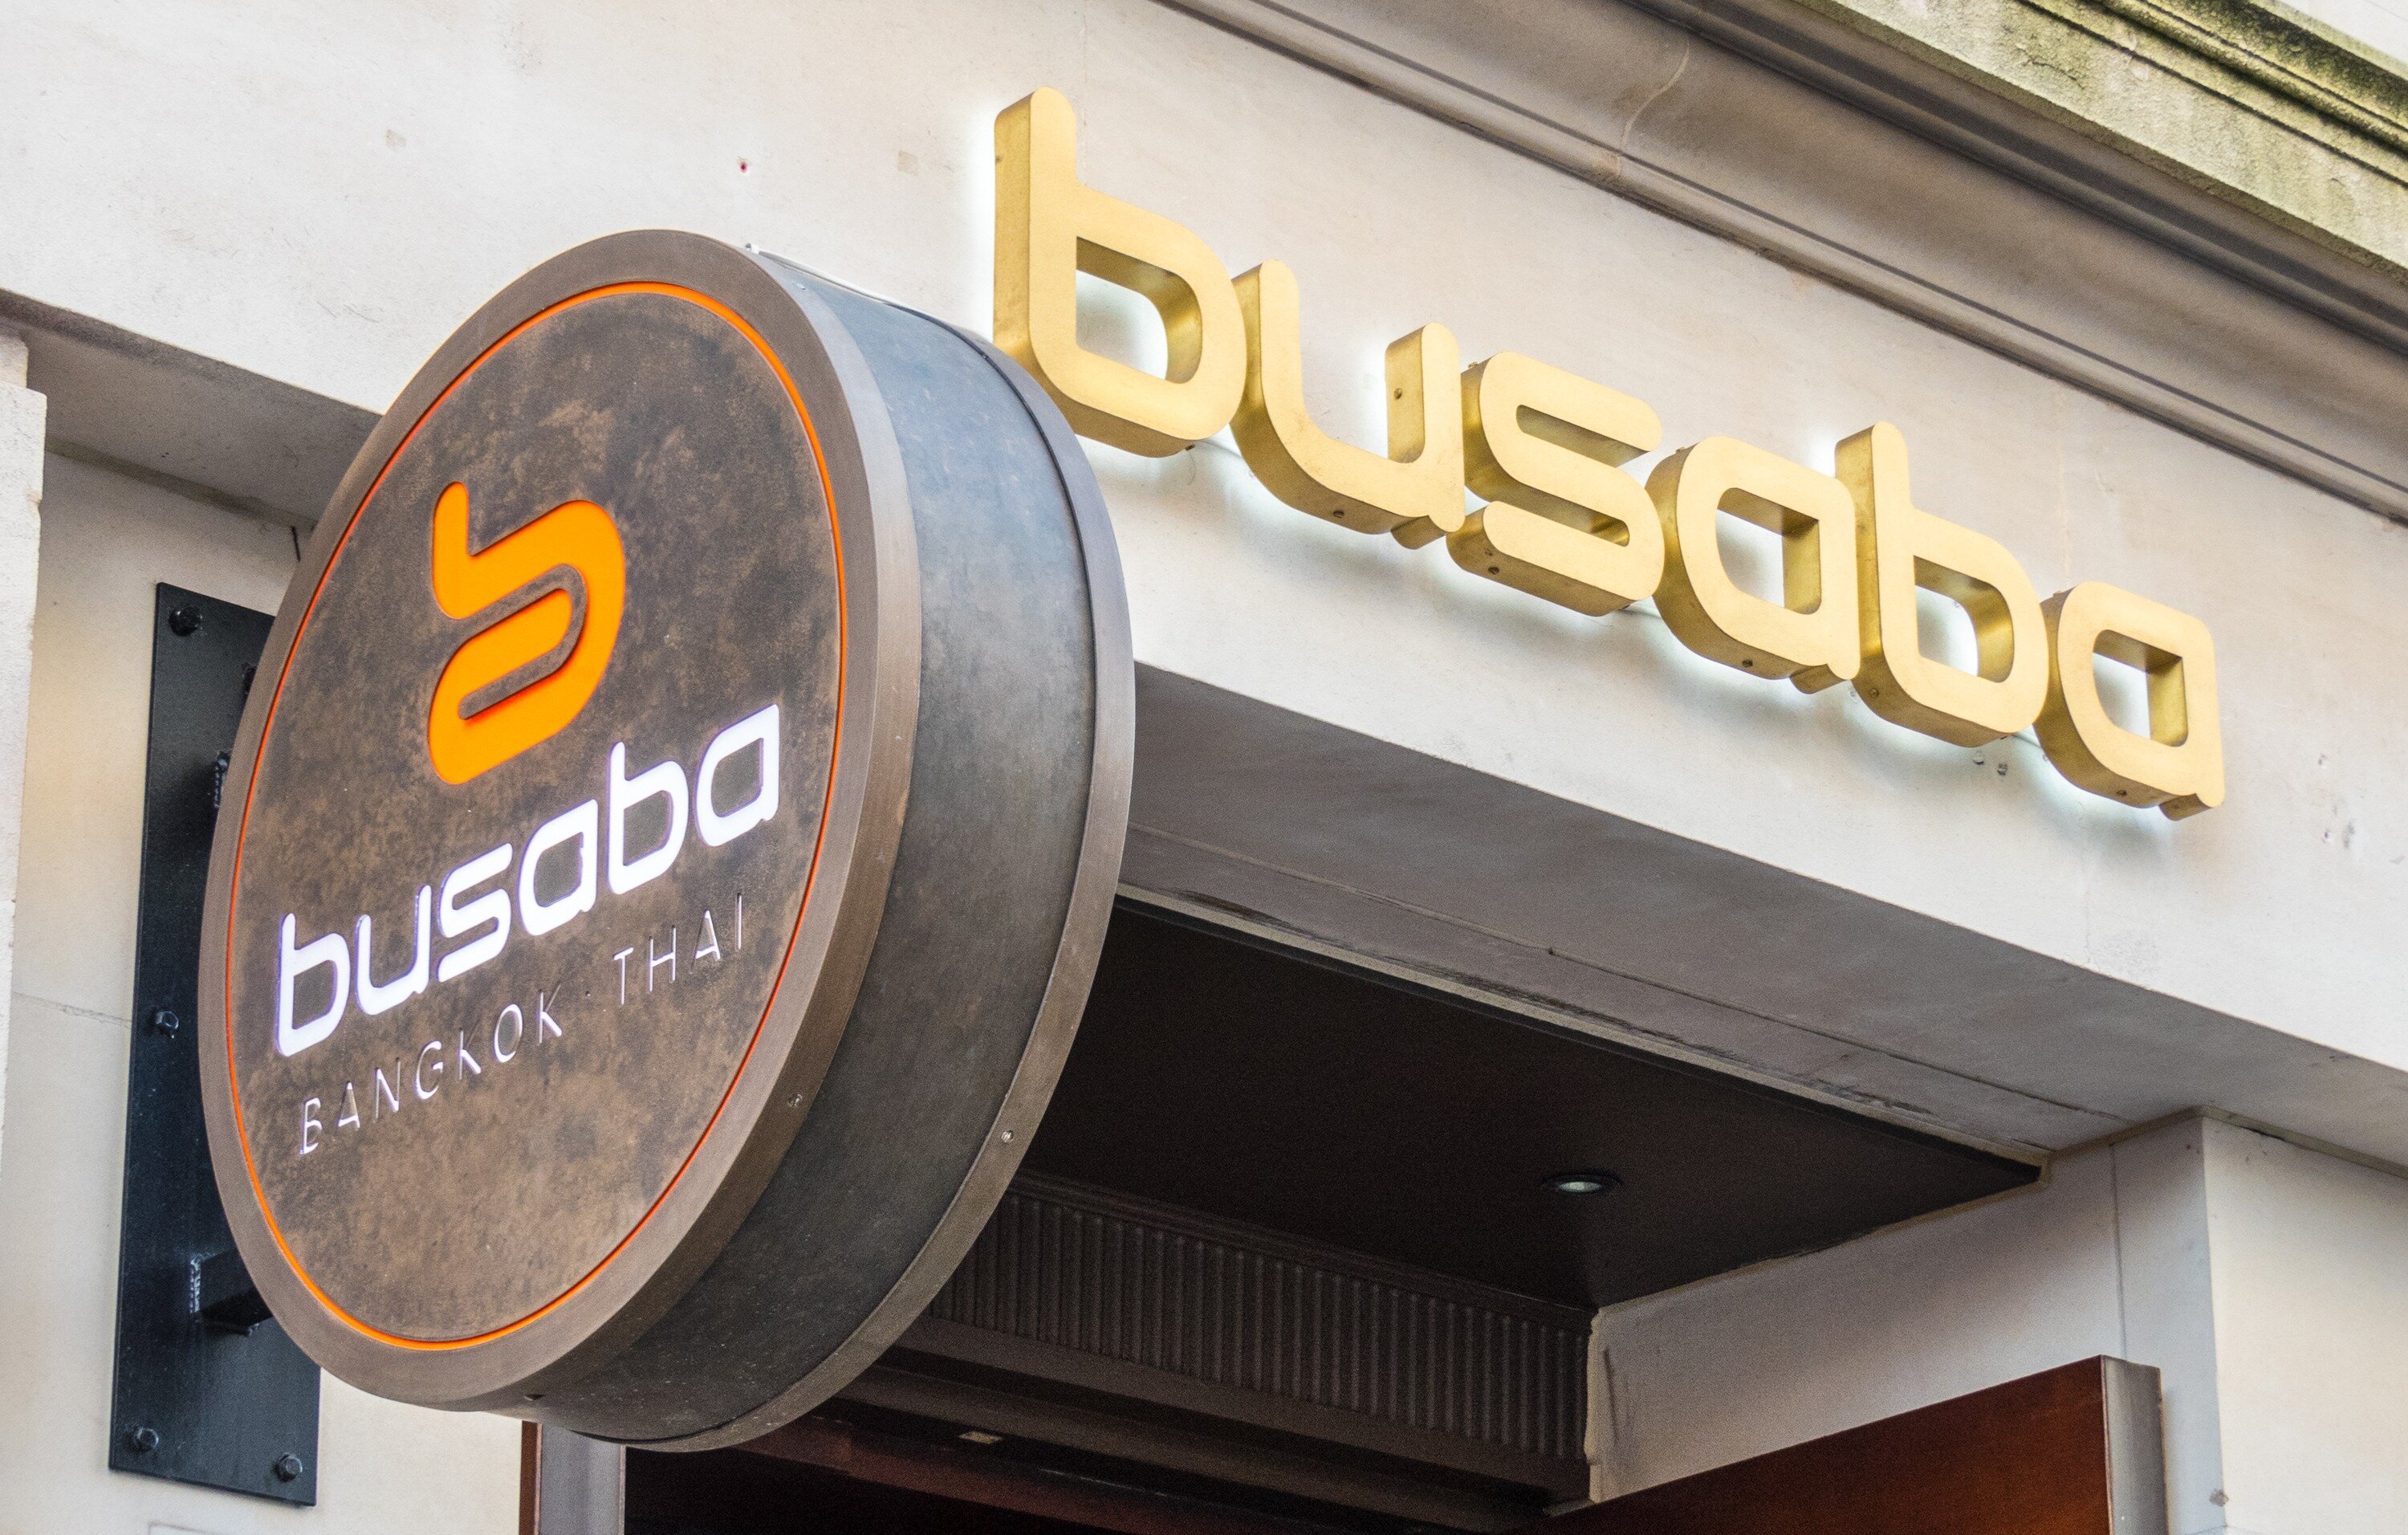 Busaba to focus on London opportunities despite cost of living challenges